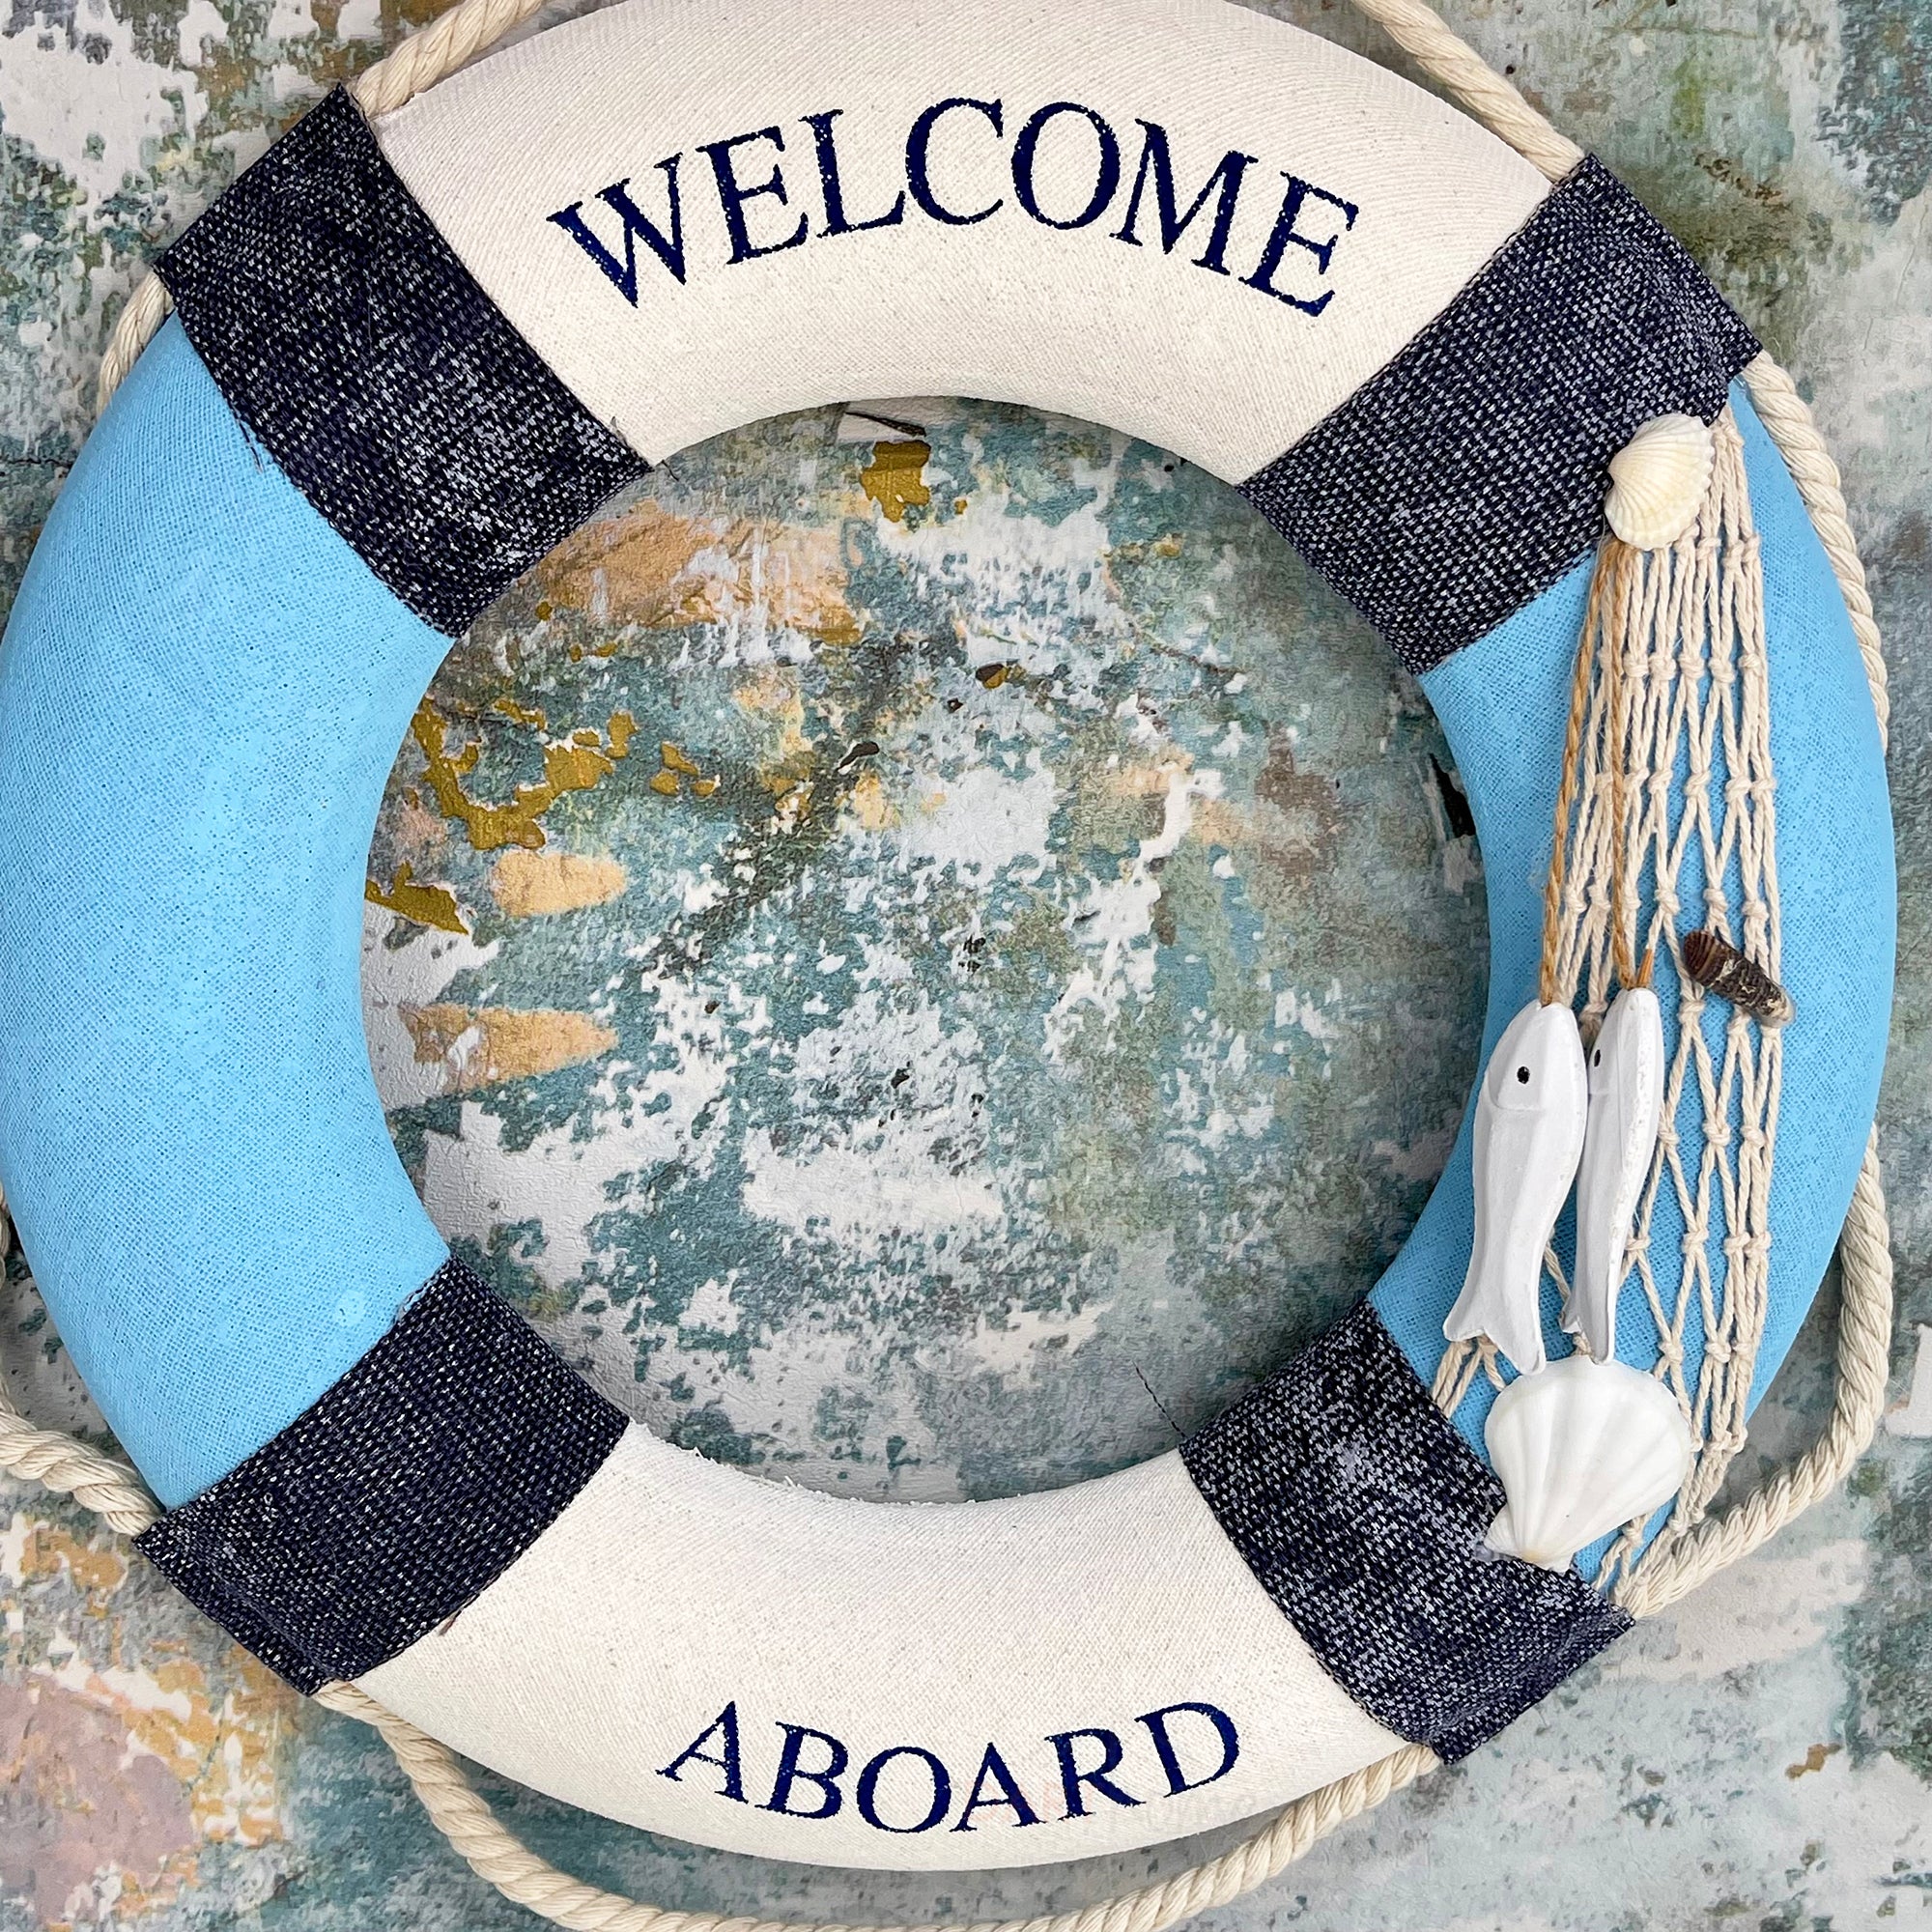 Bilipala Rustic Nautical Decorative Welcome Cloth Life Ring Buoy Home Wall  Door Hangings Decor, Blue, Pack of 2 : Amazon.in: Home & Kitchen